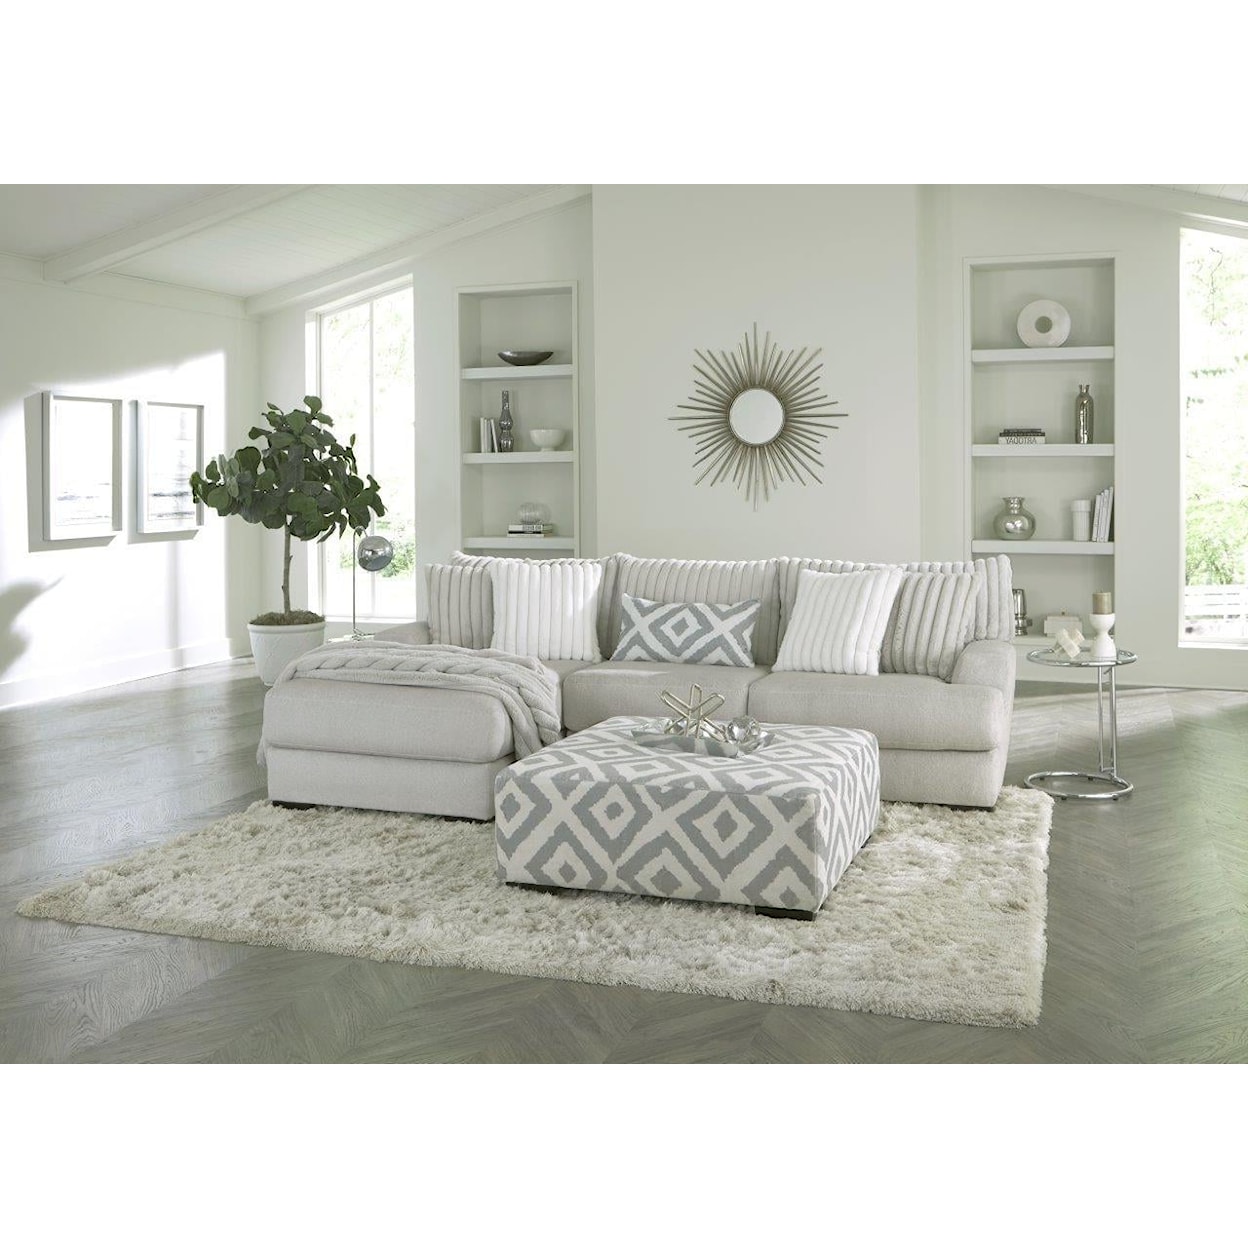 Albany Clarissa CLARISSA SILVER 2 PIECE SECTIONAL. | WITH LA